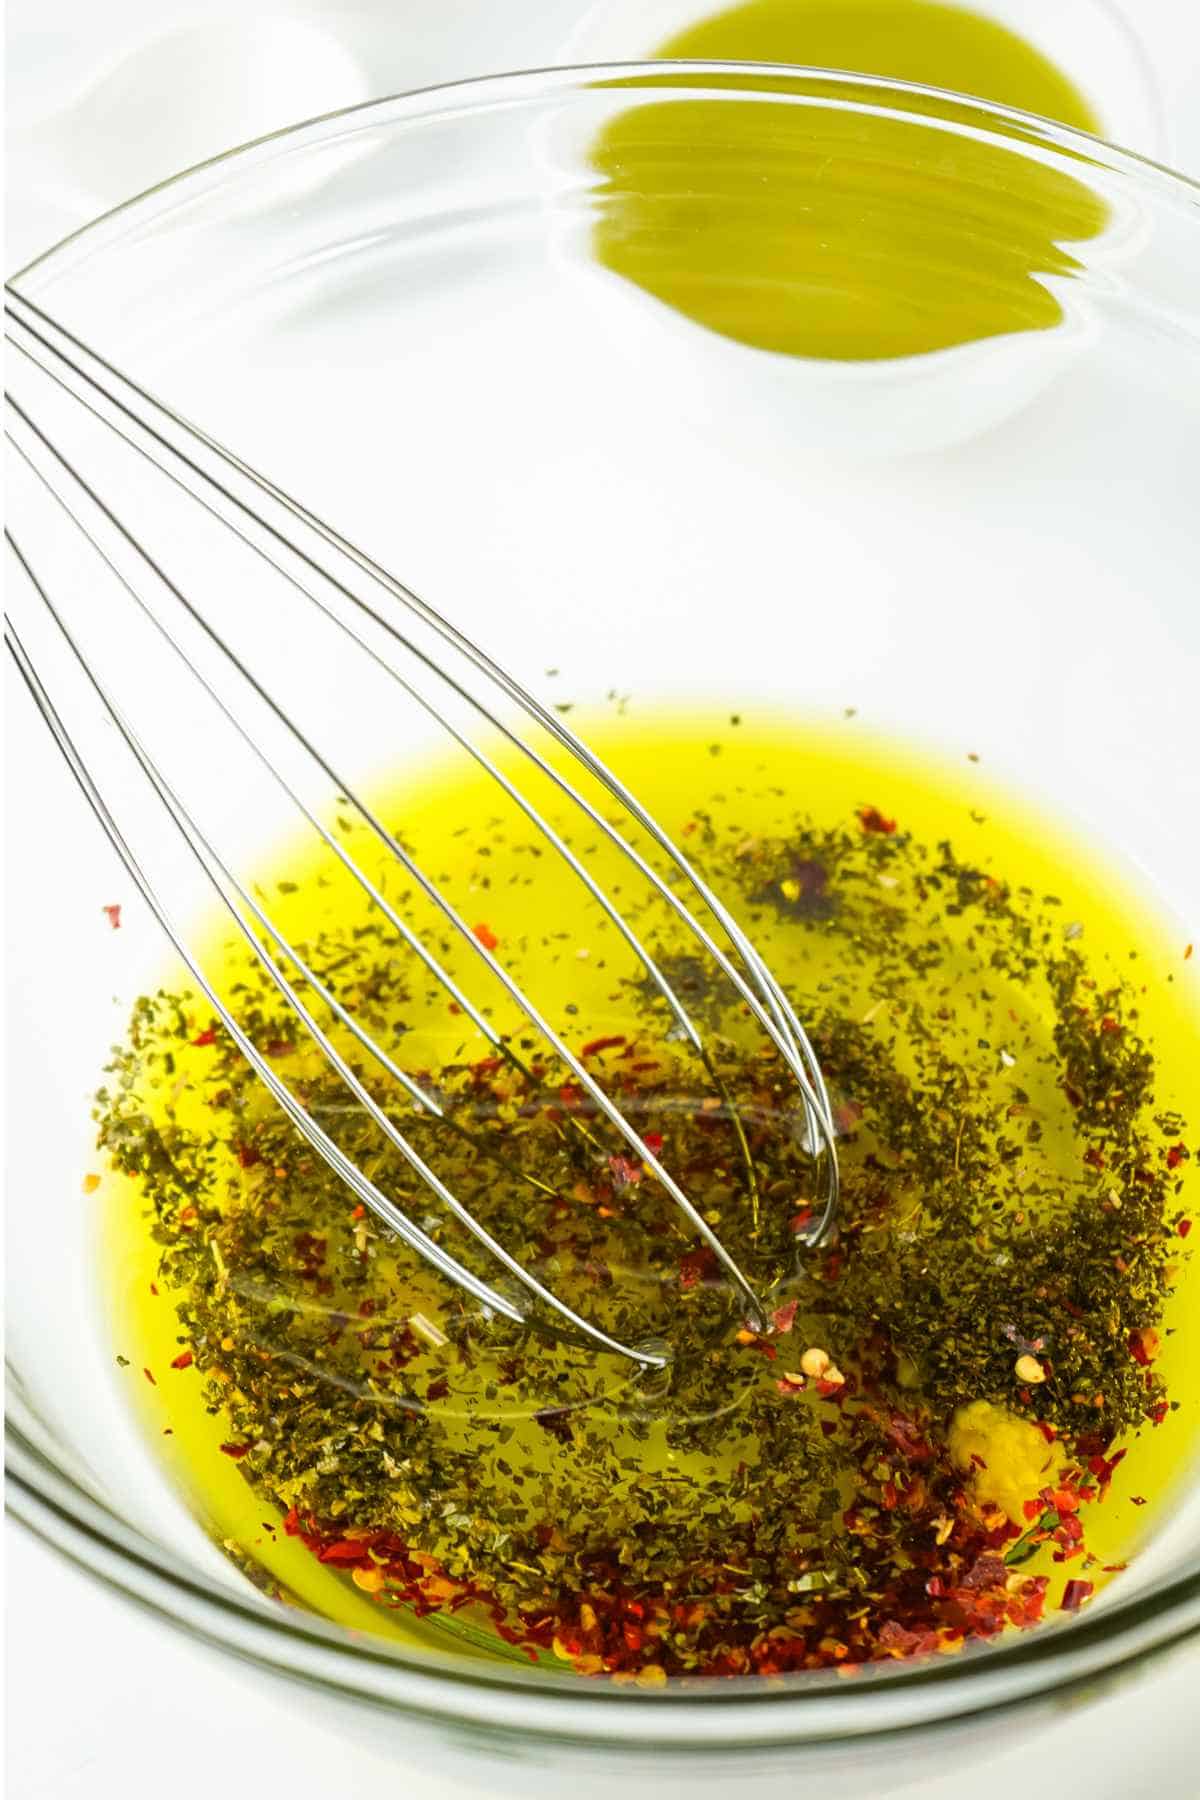 whisk in a bowl of oil and seasonings.